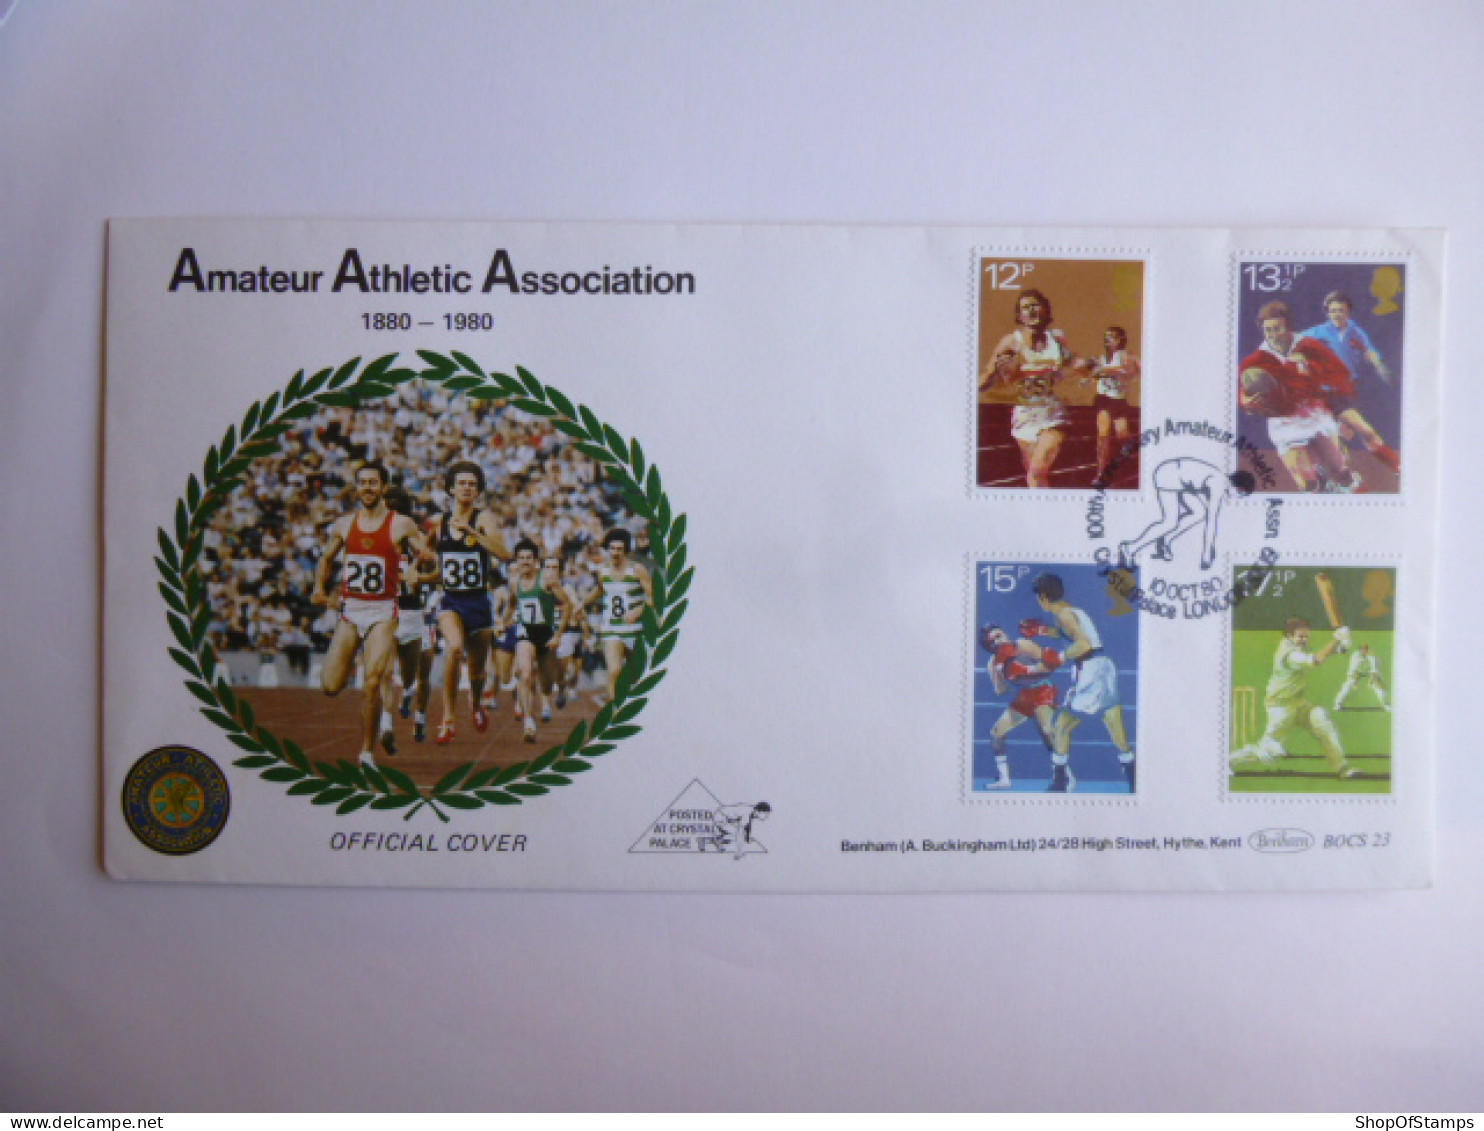 GREAT BRITAIN SG 1134-37 SPORTS CENTENARIES   FDC POSTED AT CHRYSTAL PALACE - Unclassified